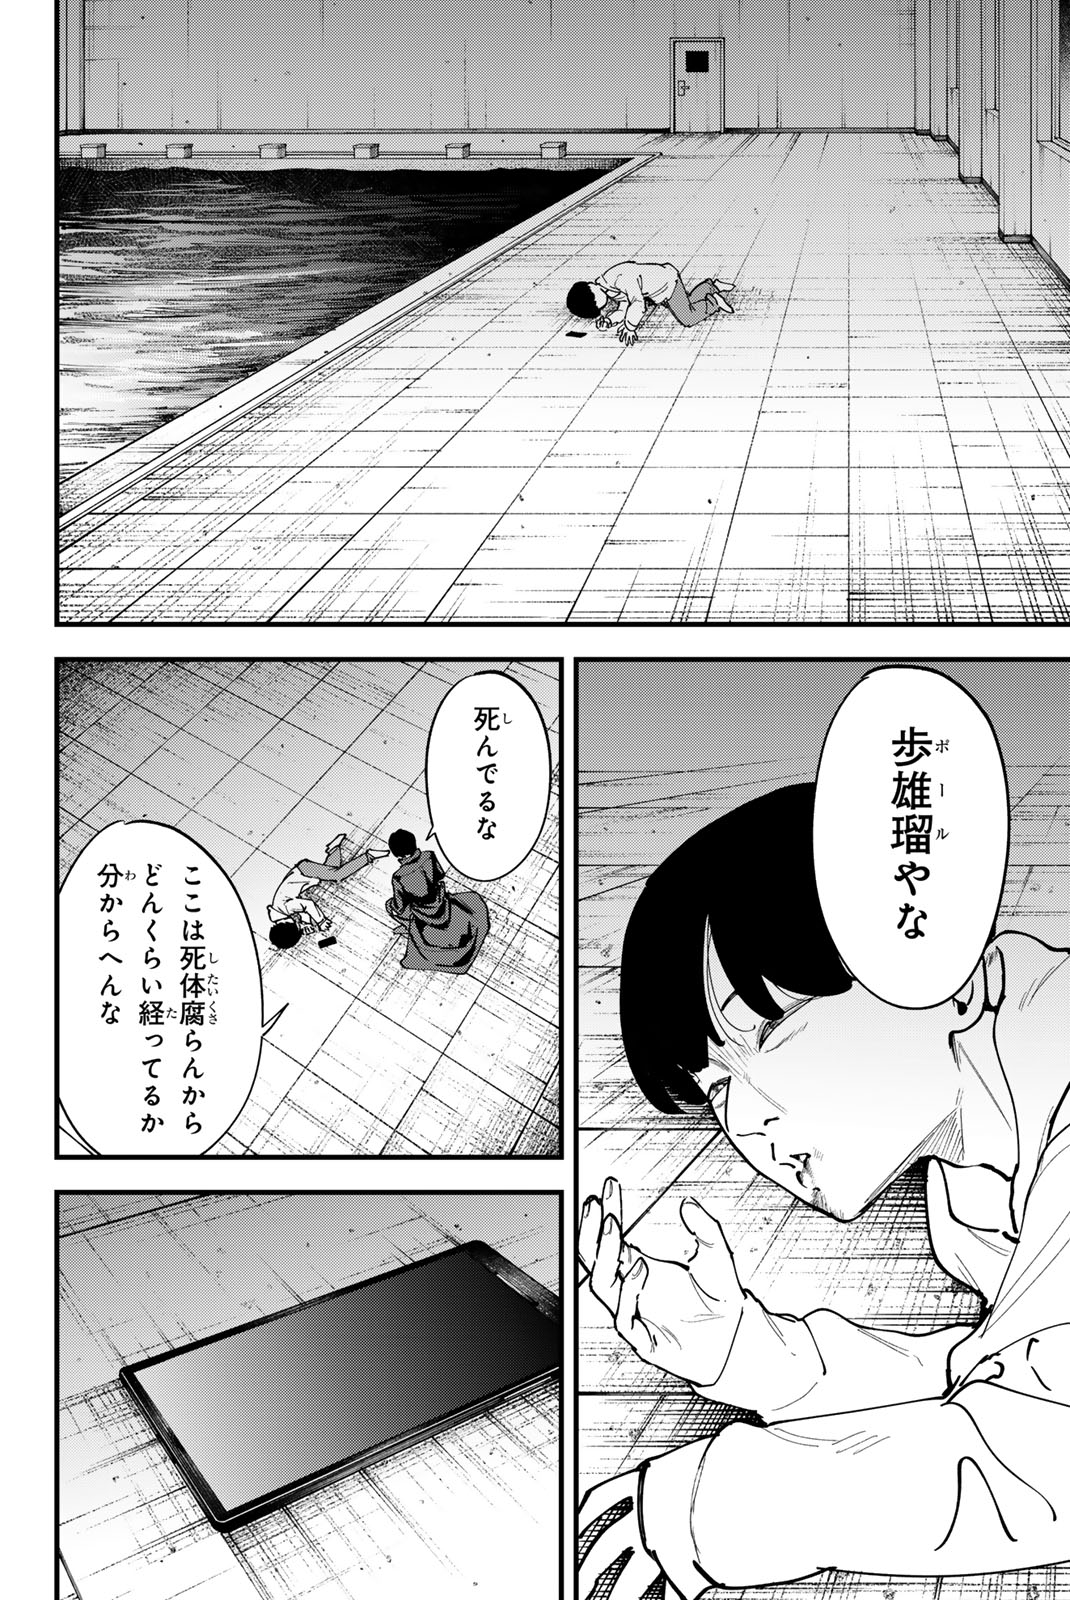 Redrum 第20話 - Page 2